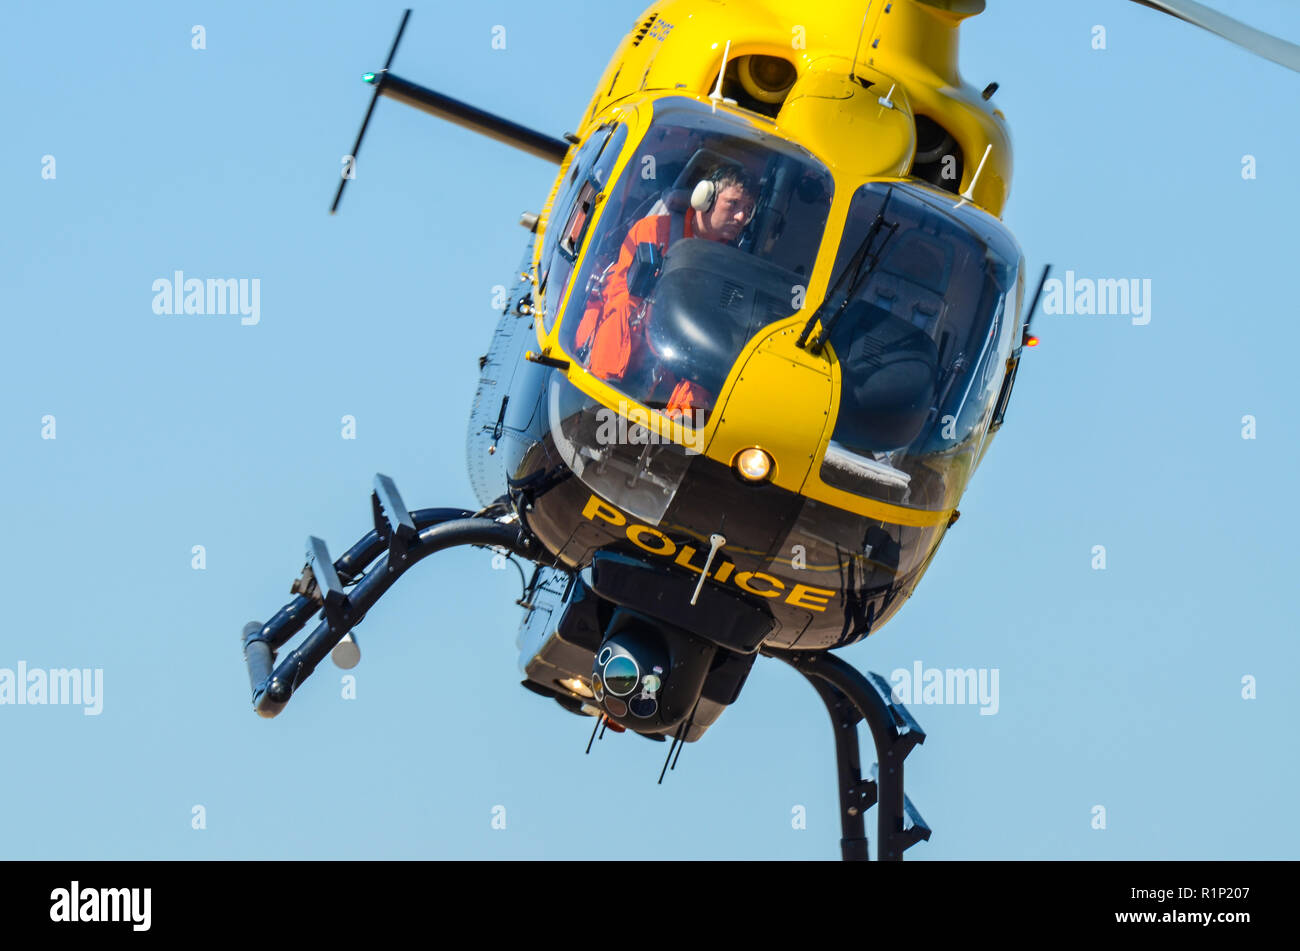 Police helicopter with pilot. Eurocopter EC135 helicopter. Law enforcement aviation. Flying with space for copy Stock Photo